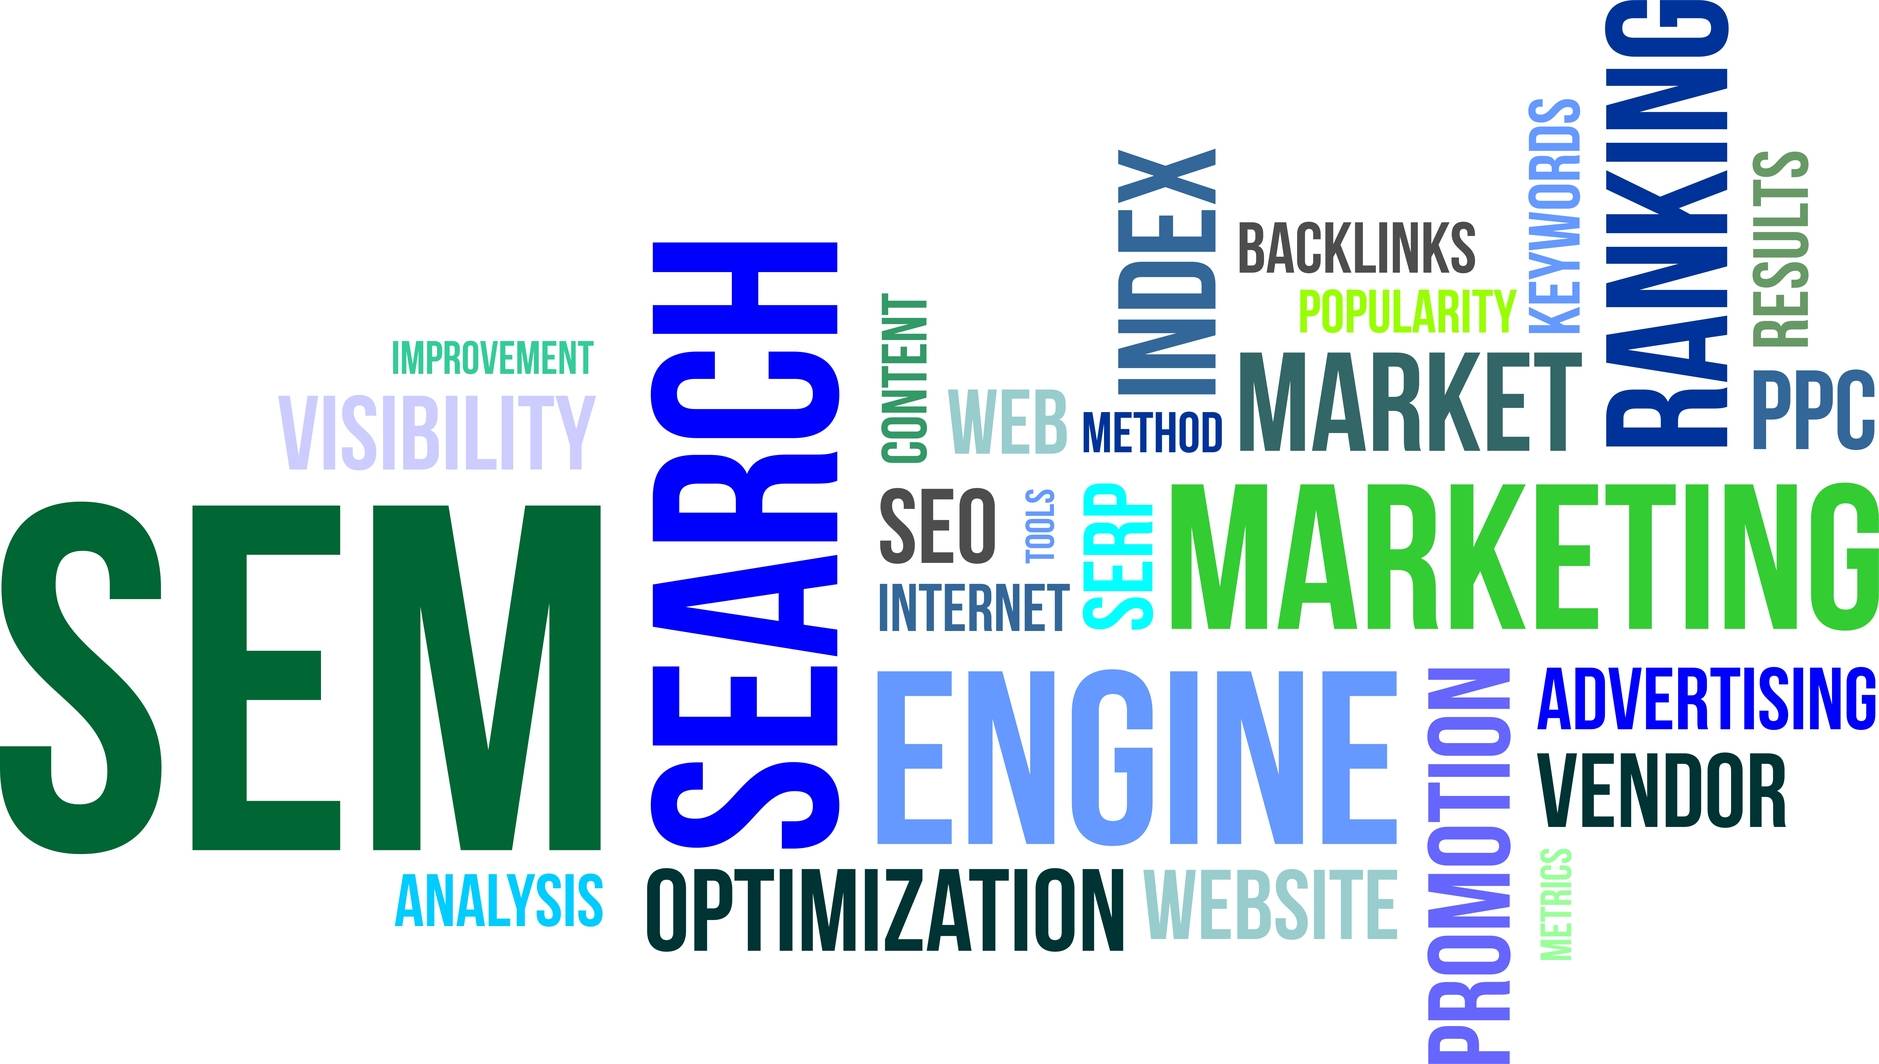 Why Hiring a Search Engine marketing company Dallas Should Be one of your New Year’s Resolutions for 2014